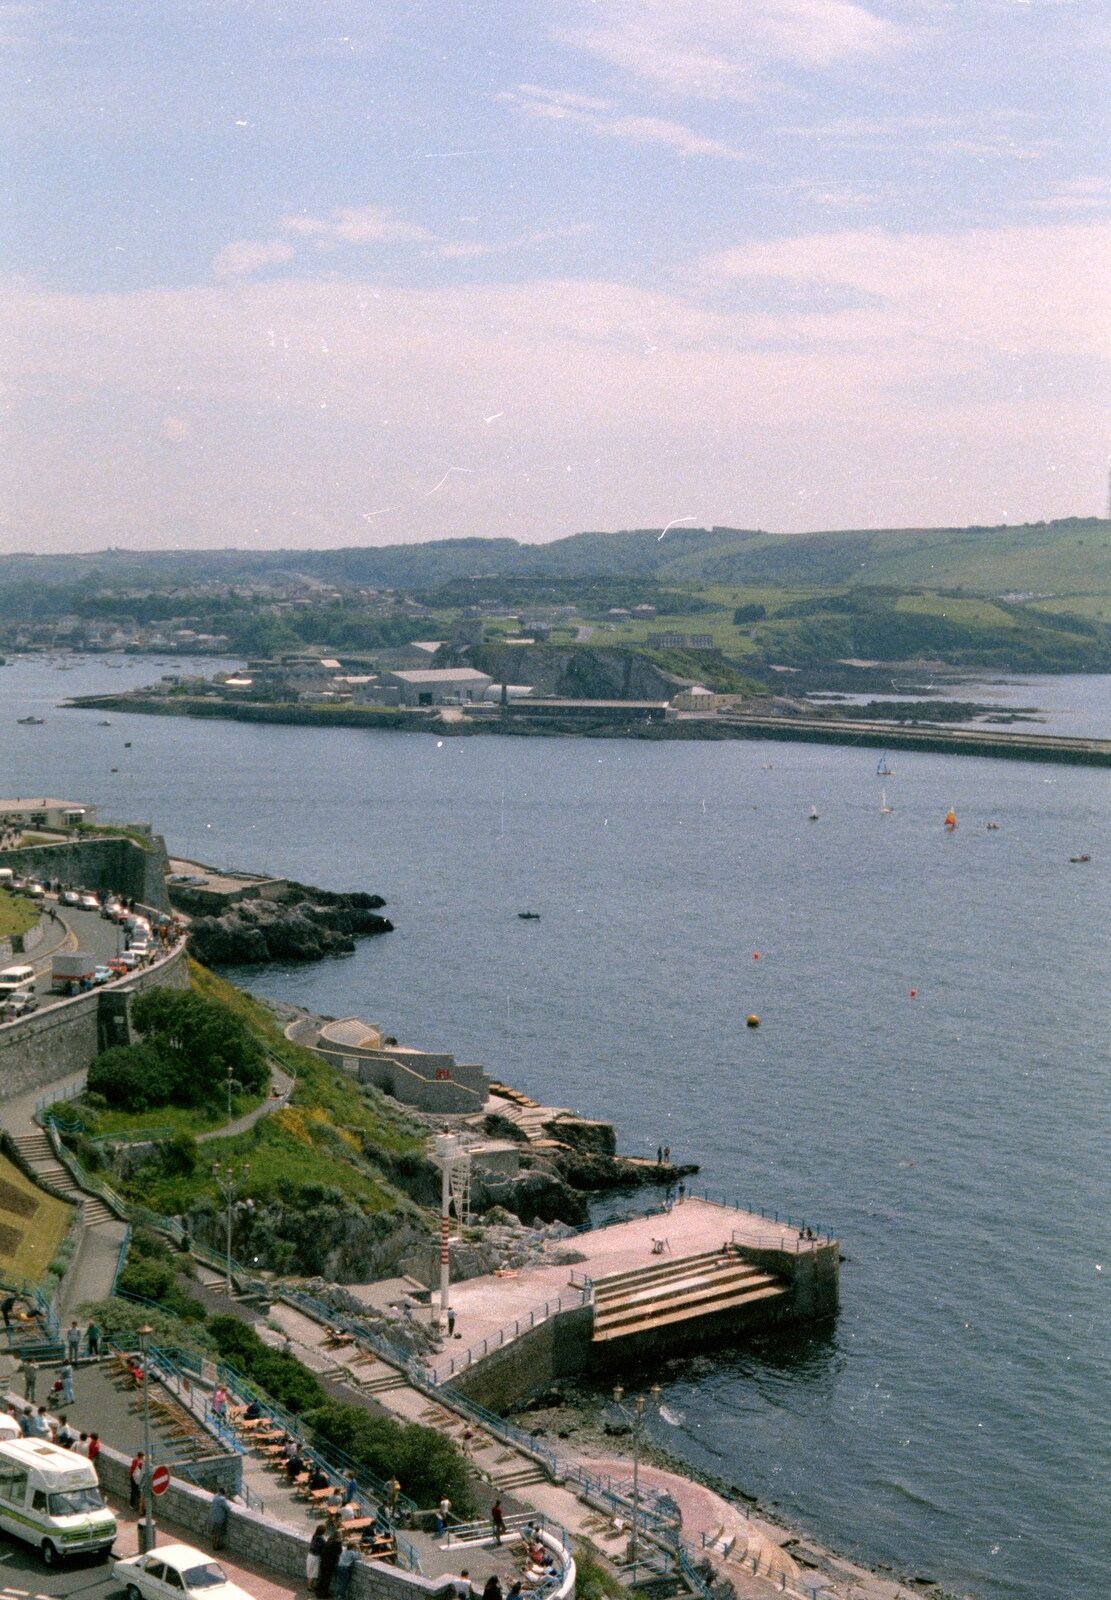 The Mount Batten Centre and swimming steps from Uni: A Plymouth Hoe Panorama, Plymouth, Devon - 7th May 1986